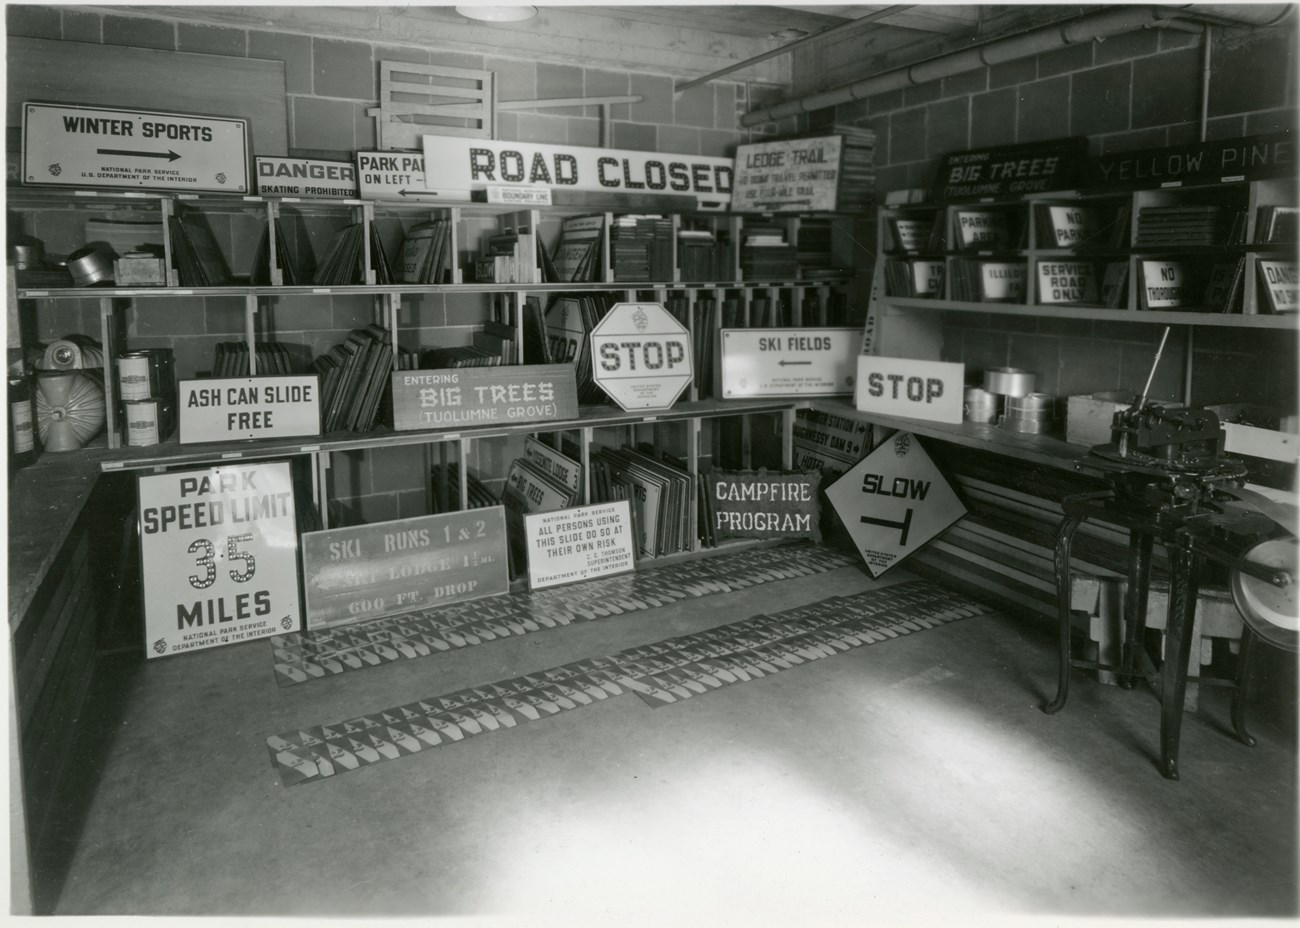 View into a room stacked with different kinds of road signs